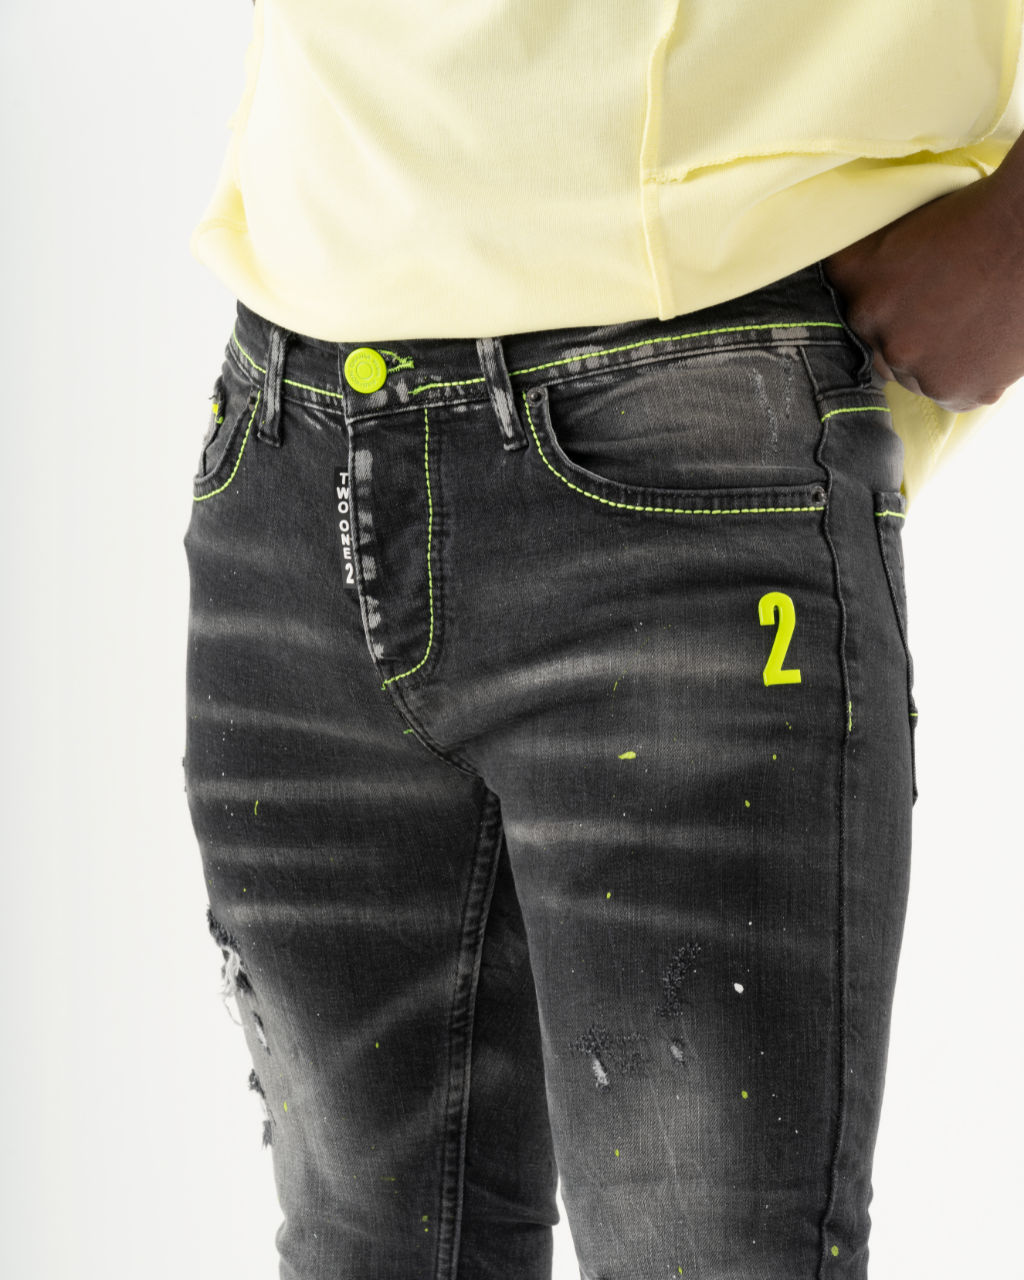 A man is wearing a pair of INKLING skinny fit black jeans with neon paint on them.